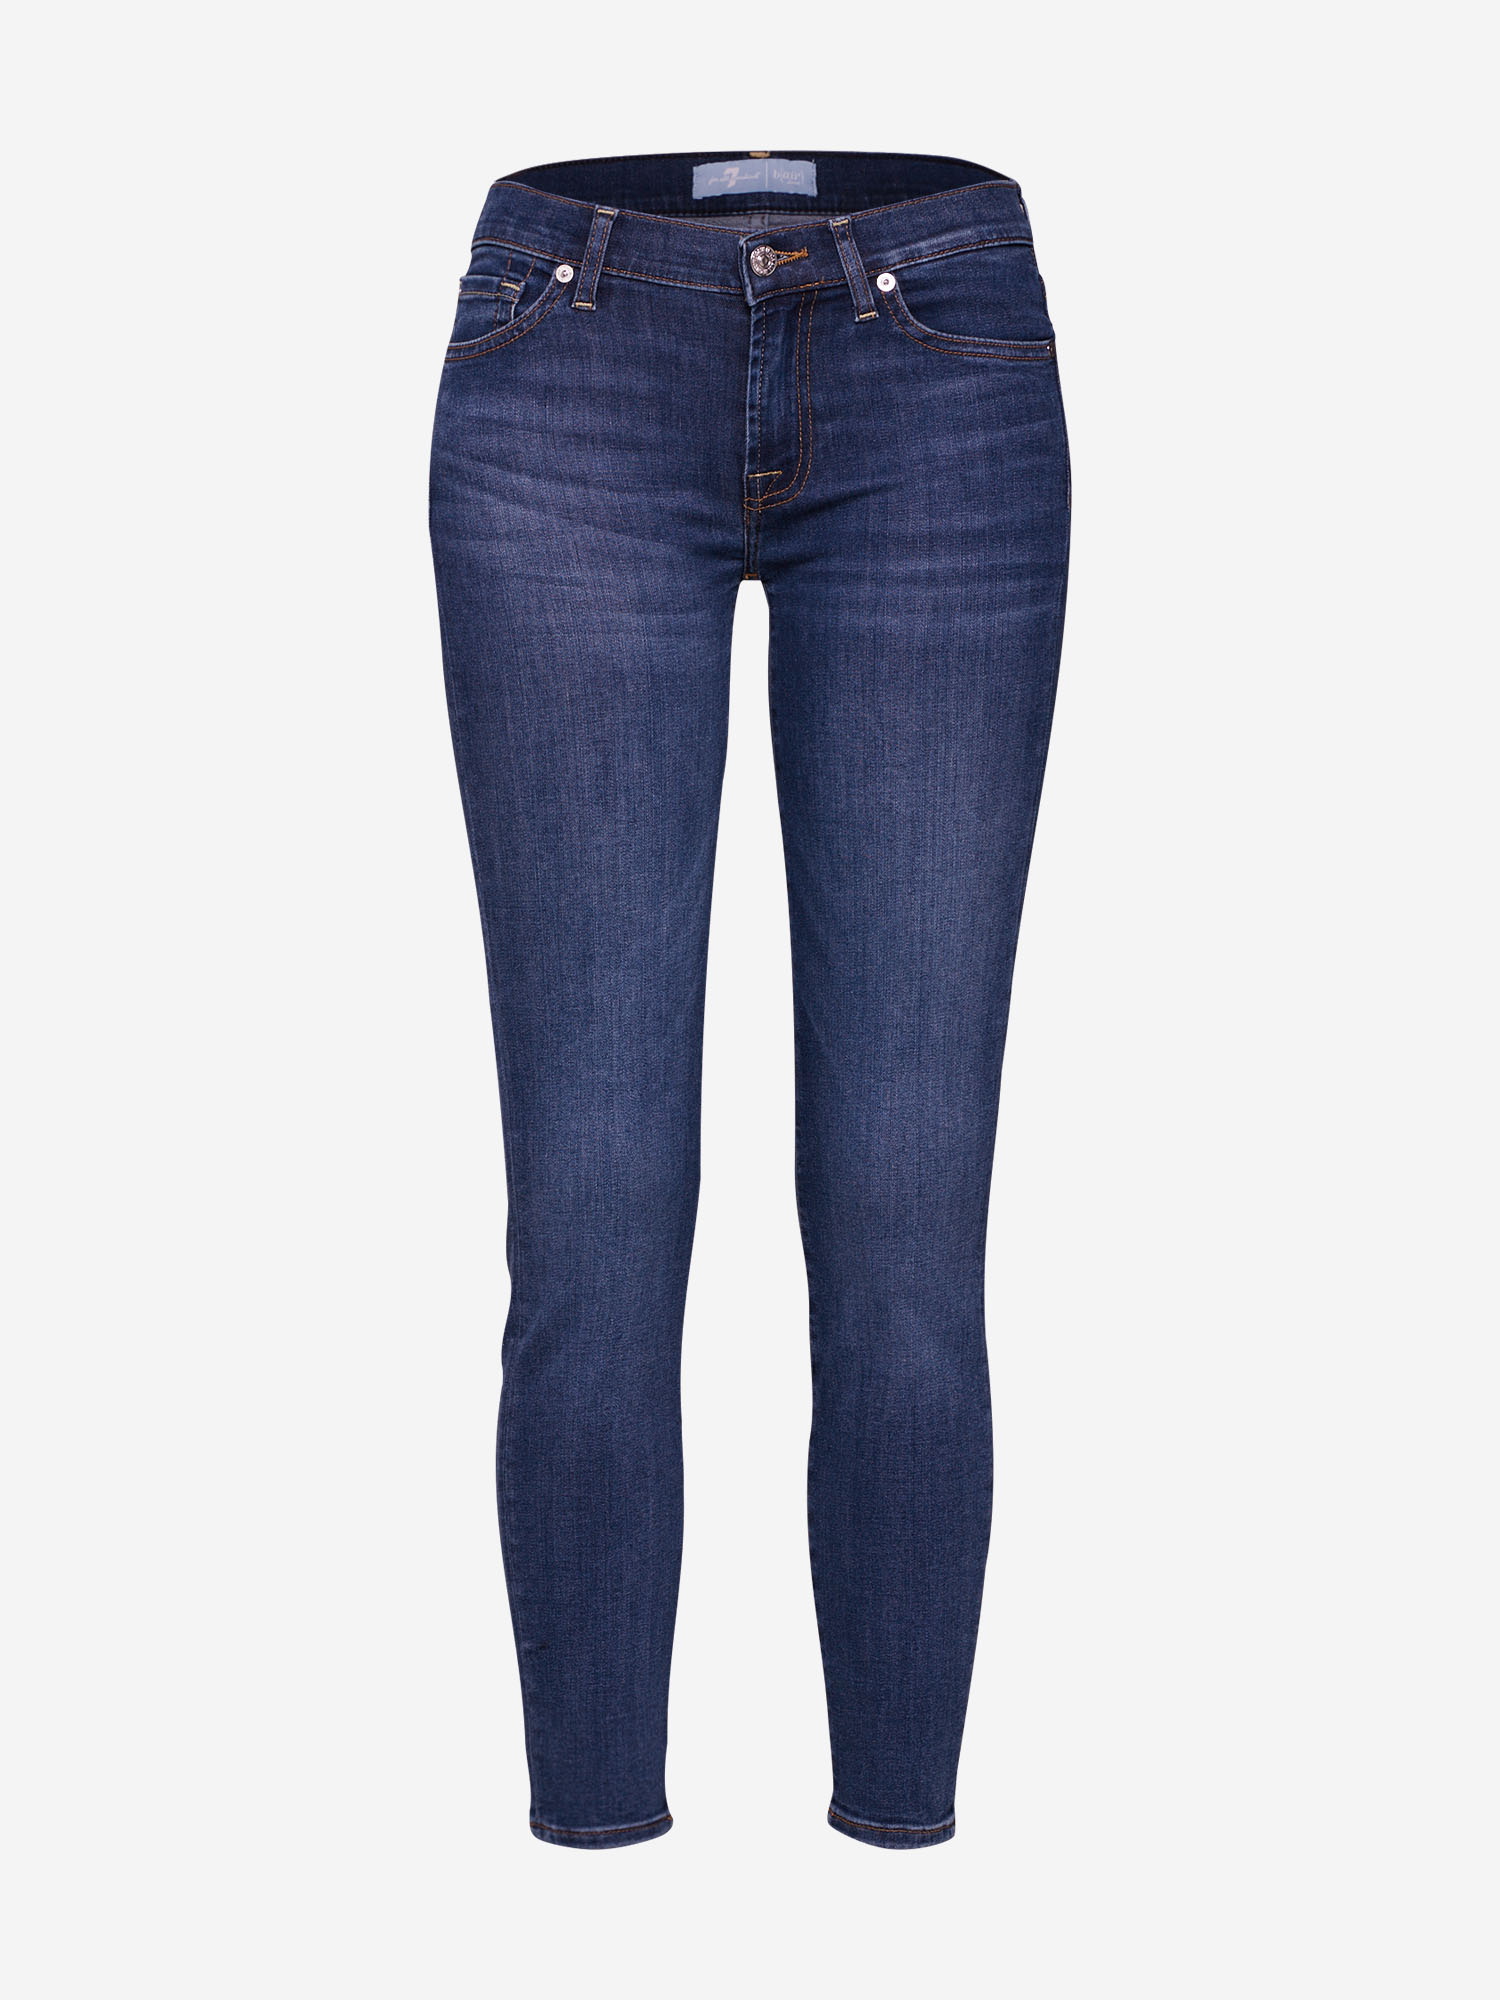 7 for all mankind Jeans The Skinny Crop in Blau 